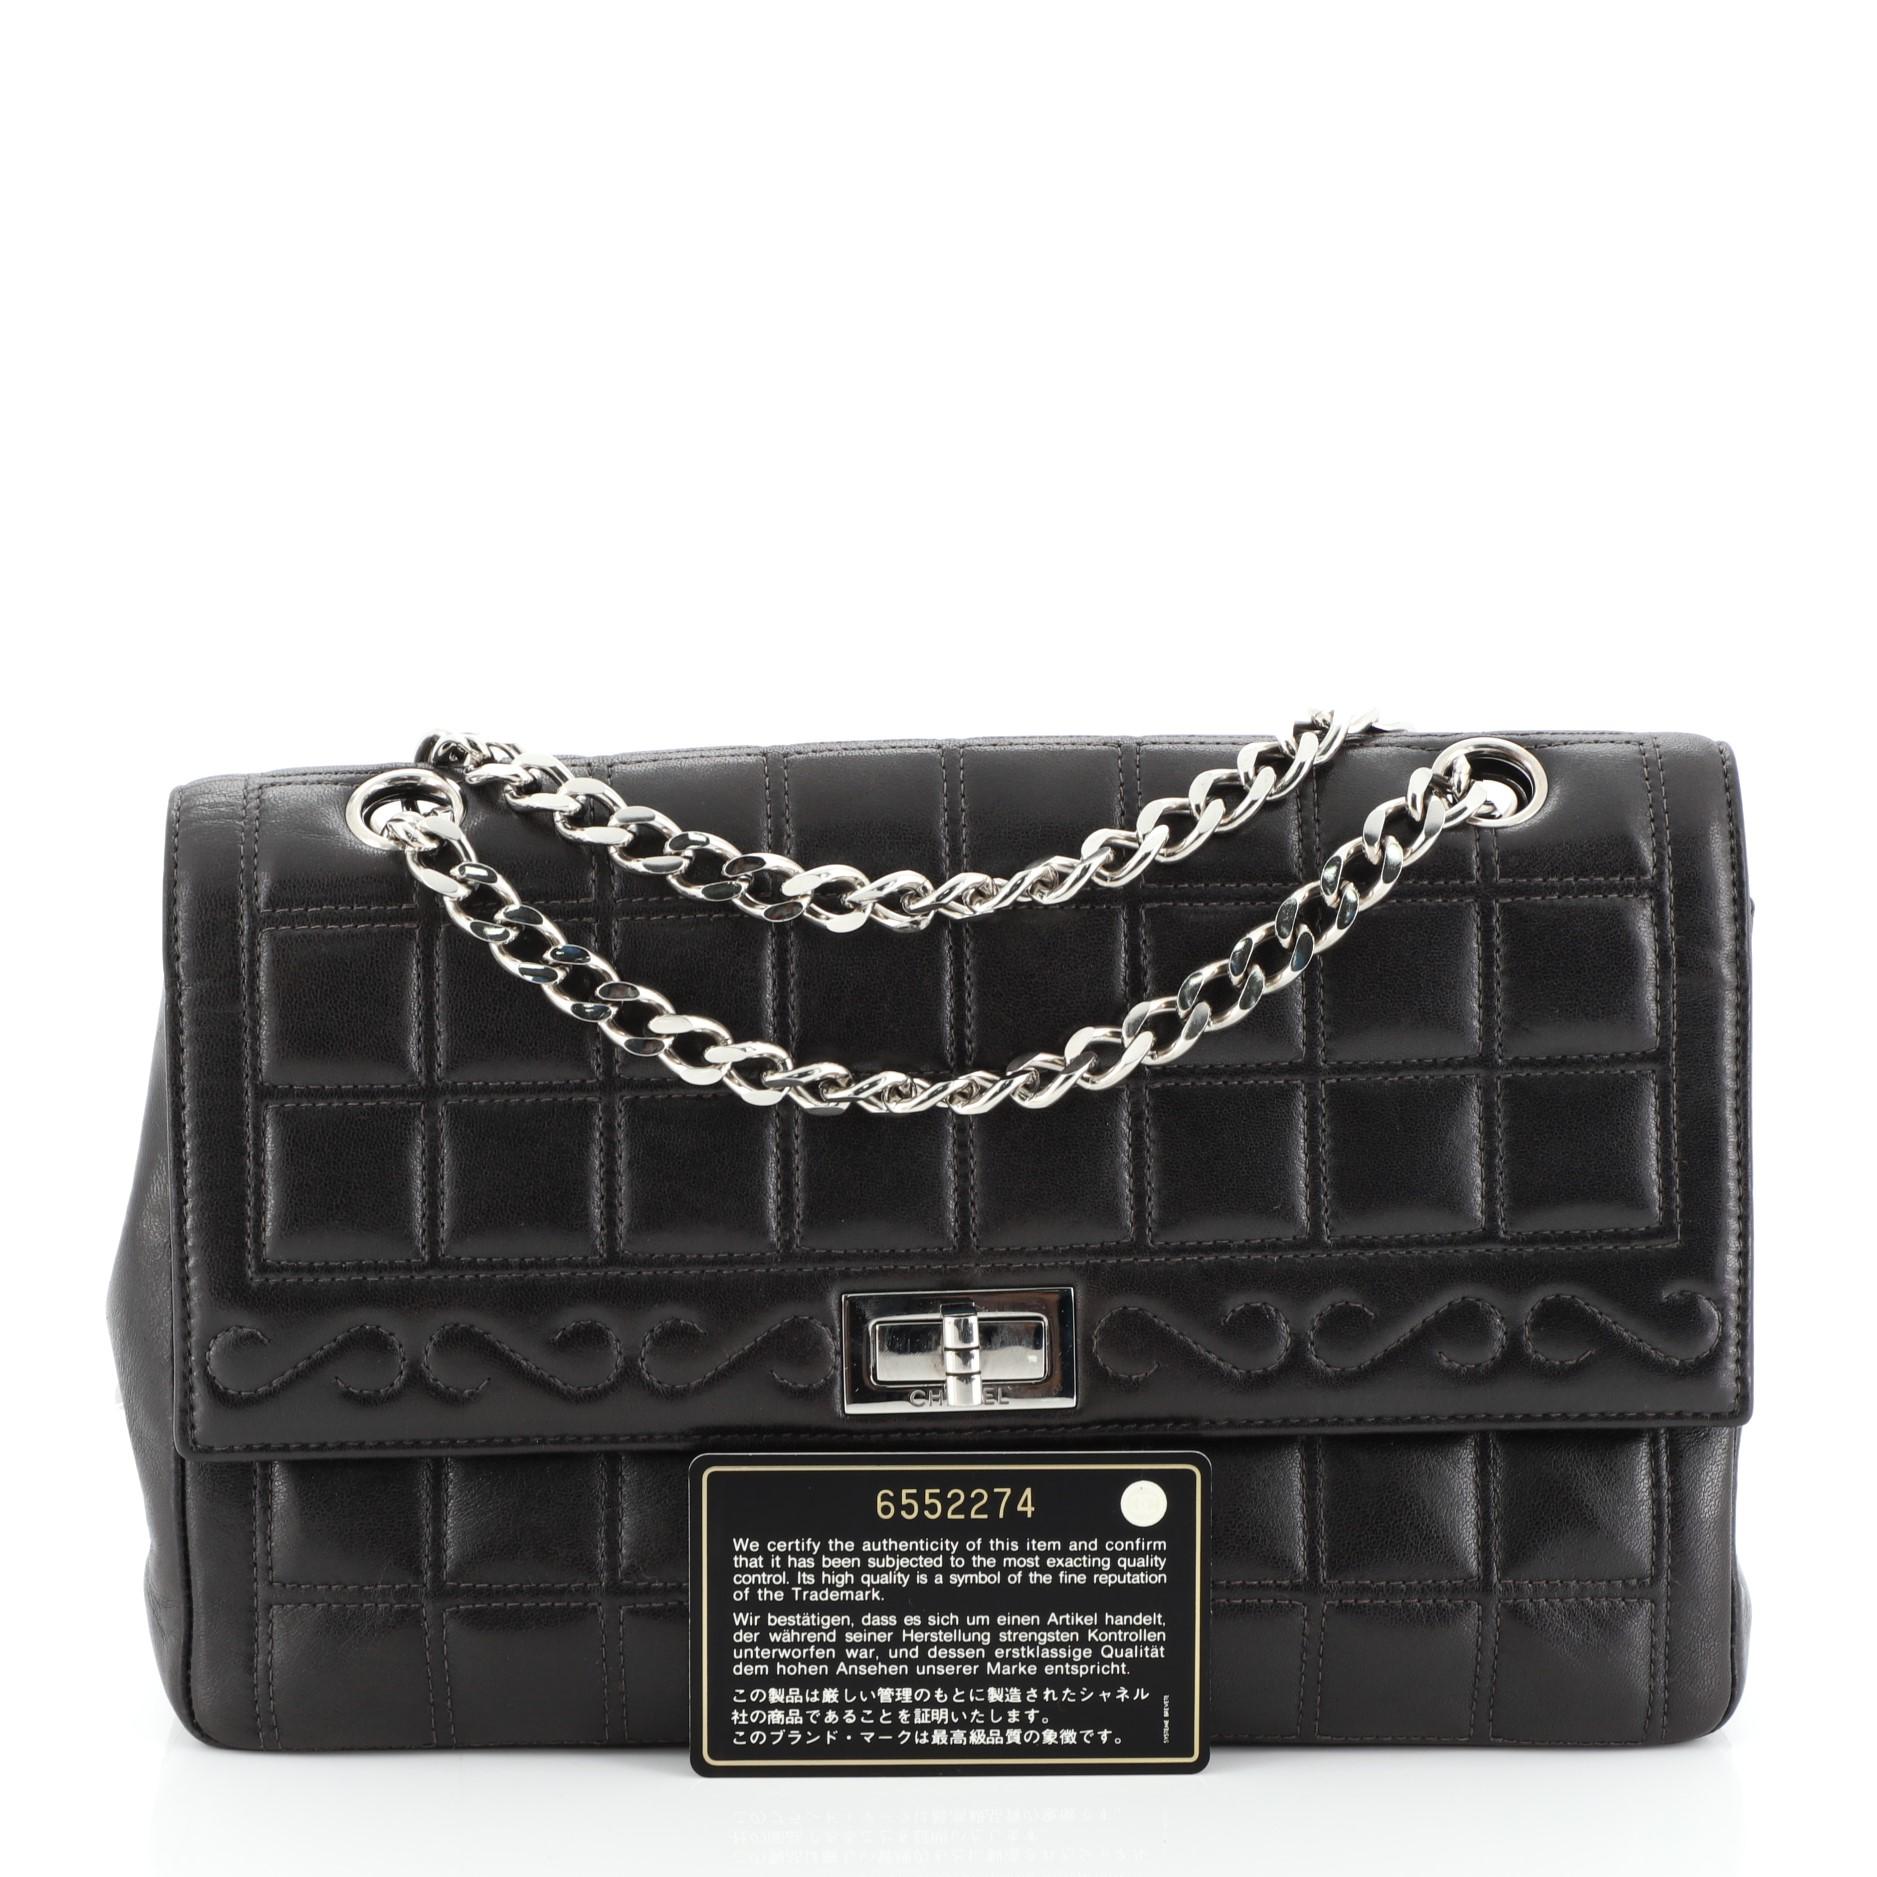 This Chanel Vintage Chocolate Bar Mademoiselle Chain Flap Bag Quilted Leather Medium, crafted from black quilted leather, features woven in leather chain link straps and silver-tone hardware. Its mademoiselle turn-lock closure opens to a black